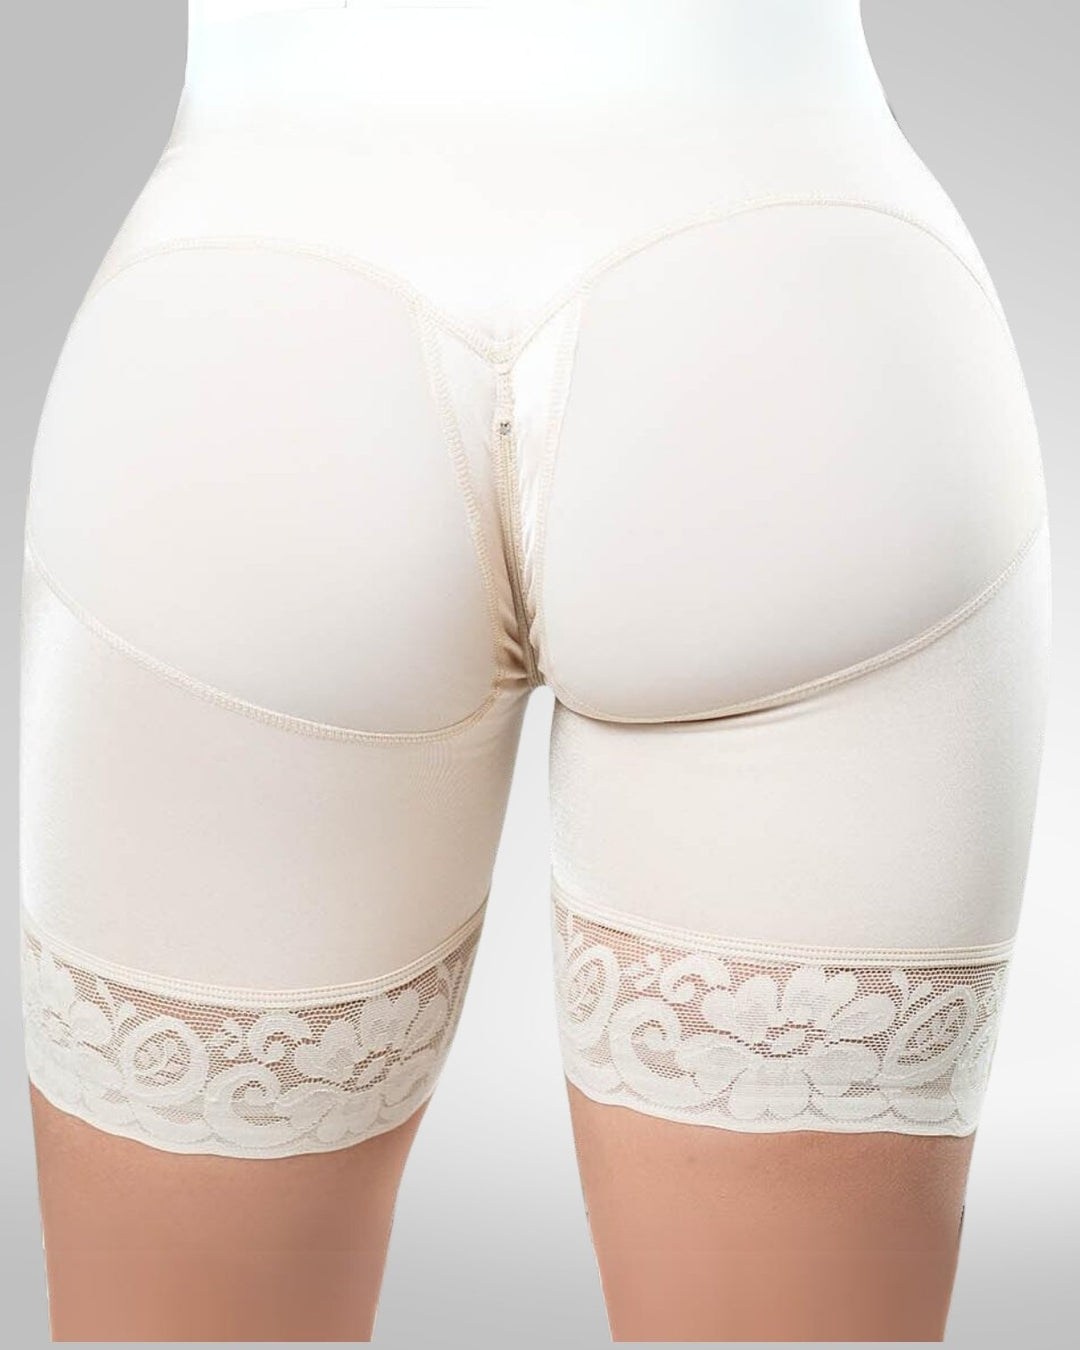 girdle with Built-in buttock lift.